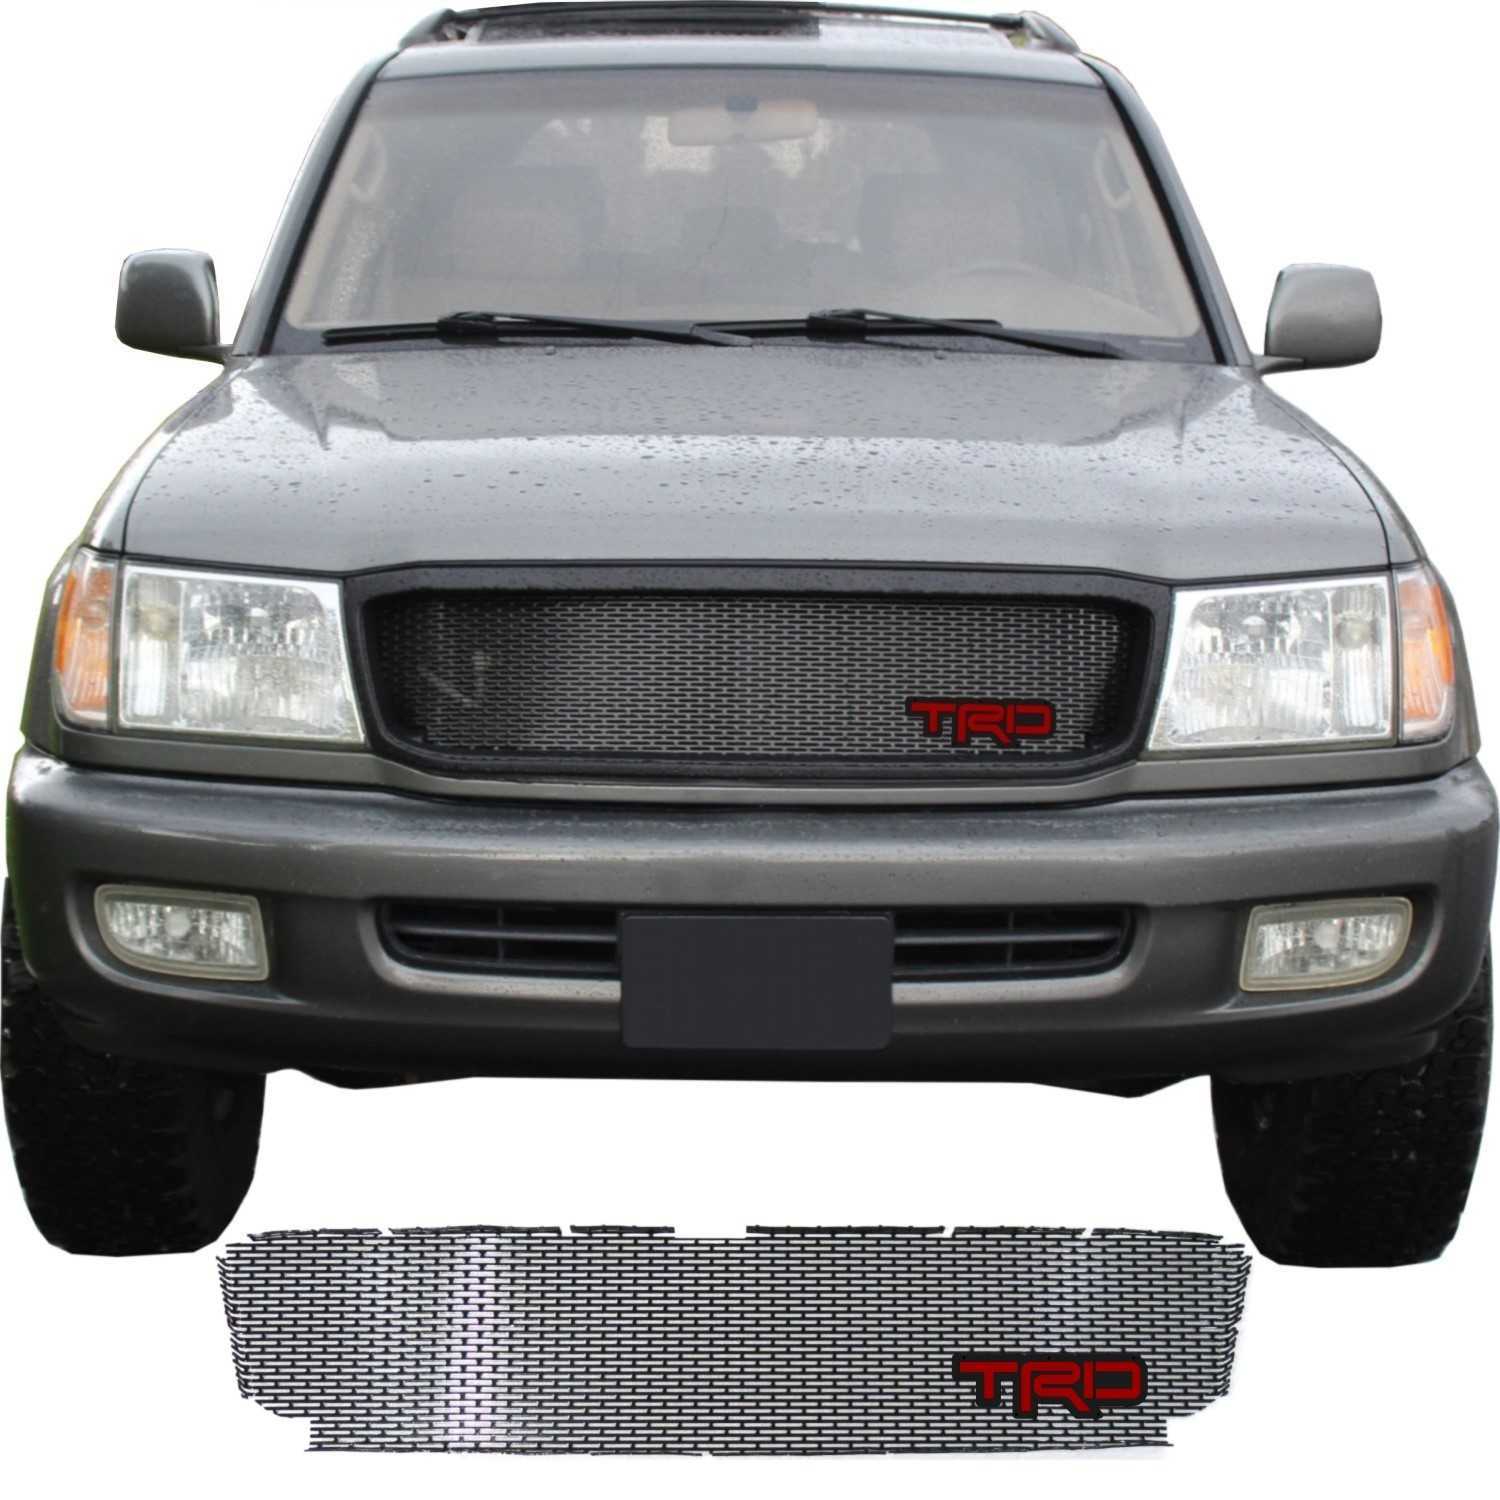 1998 - 2002 Toyota Land Cruiser Series 100 Grill Mesh and TRD Emblem